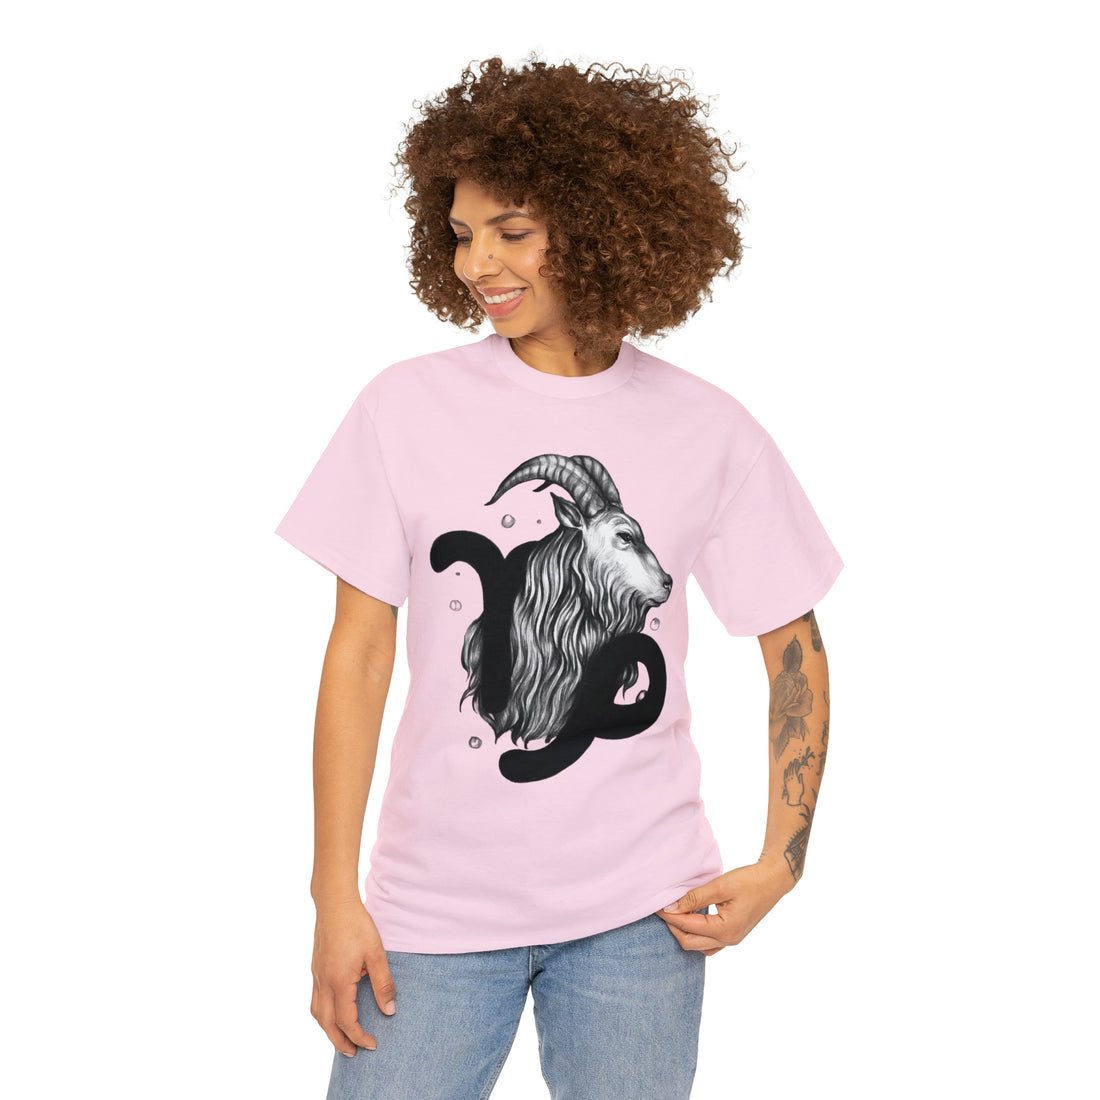 T-shirts With Astrological or Zodiac Signs: A Fashionable Way to Express Yourself